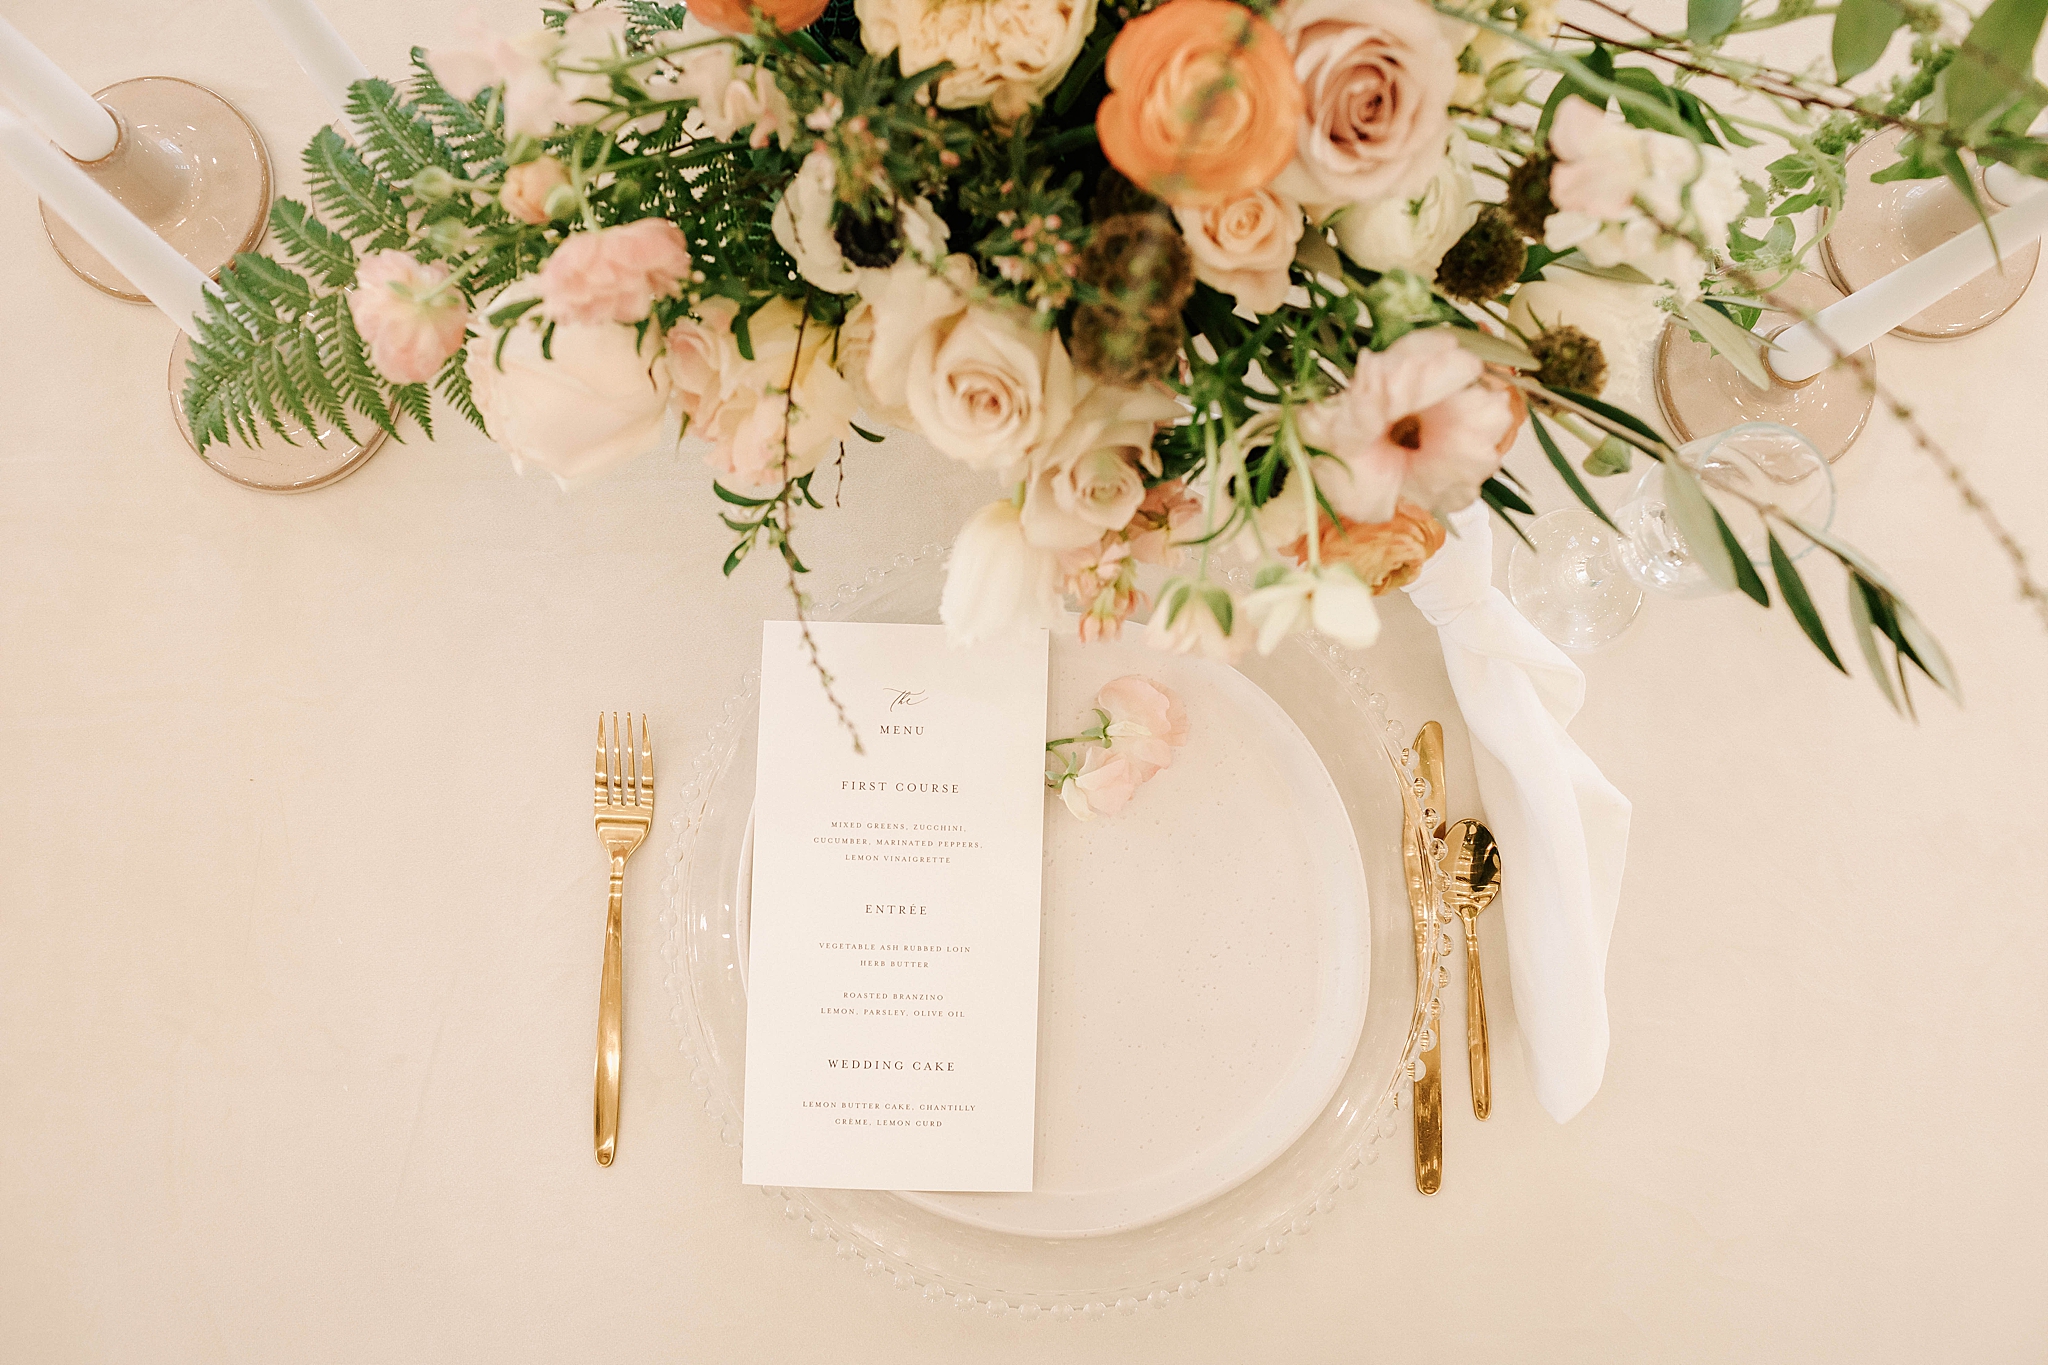 wedding setting with flowers, menu, plates and silverware at a split creek ranch wedding.